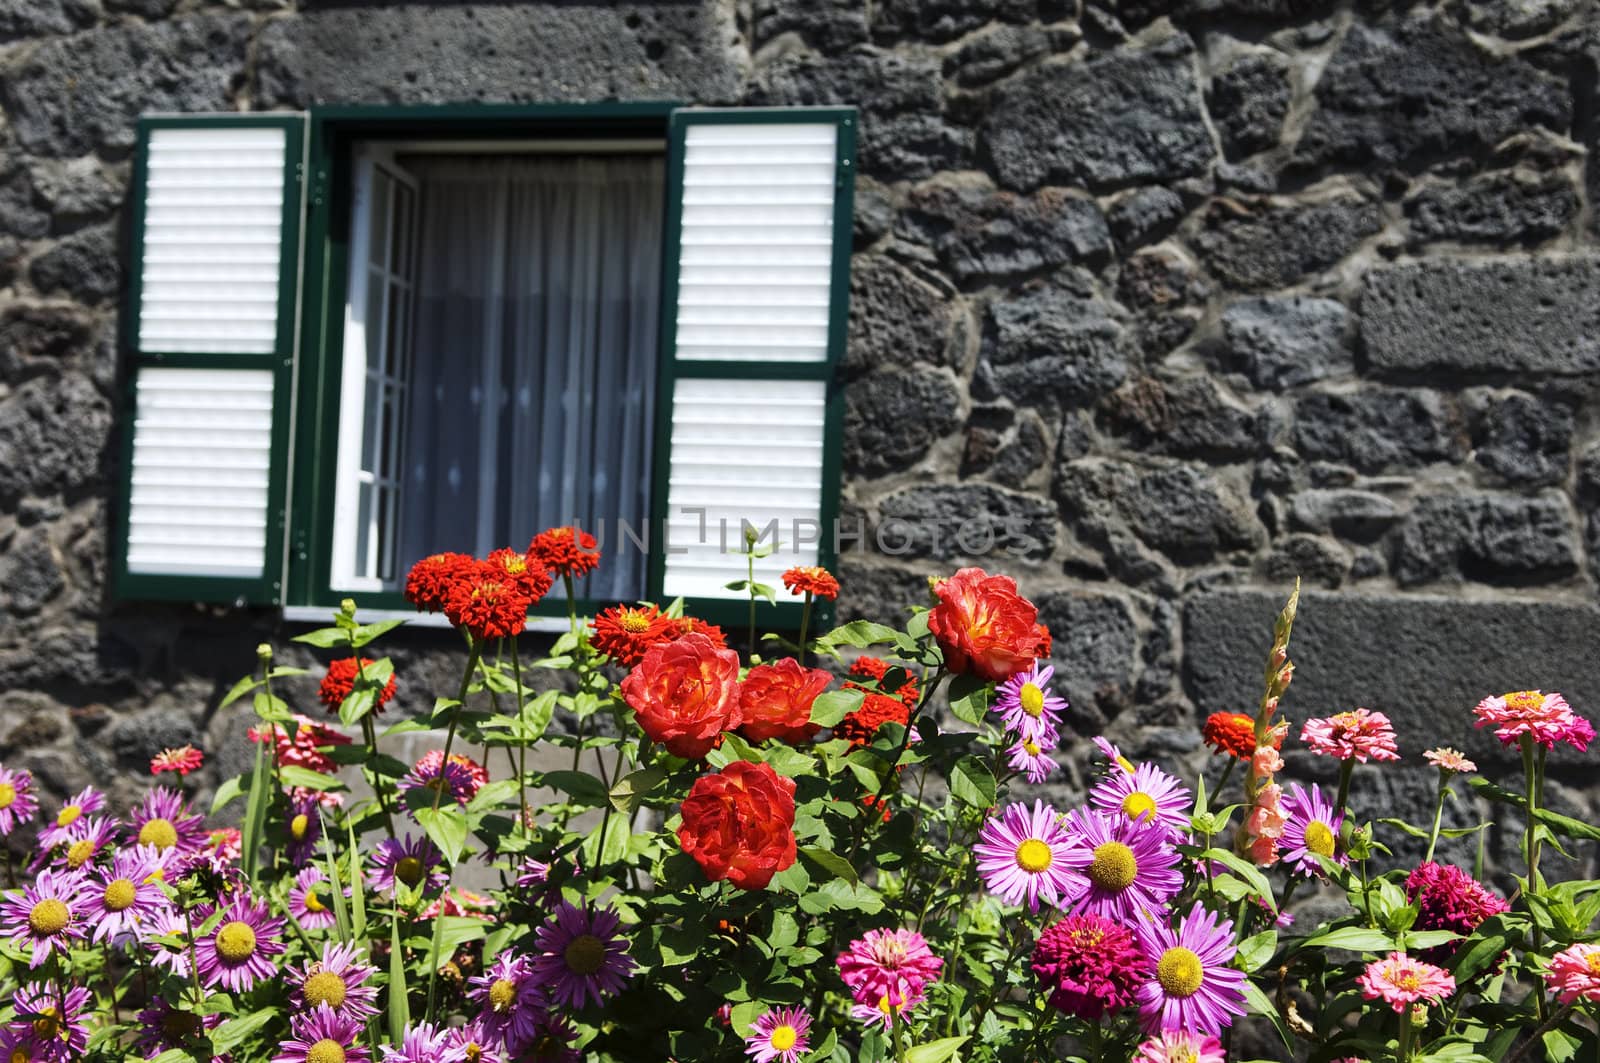 Bunch of flowers in front of a stone house